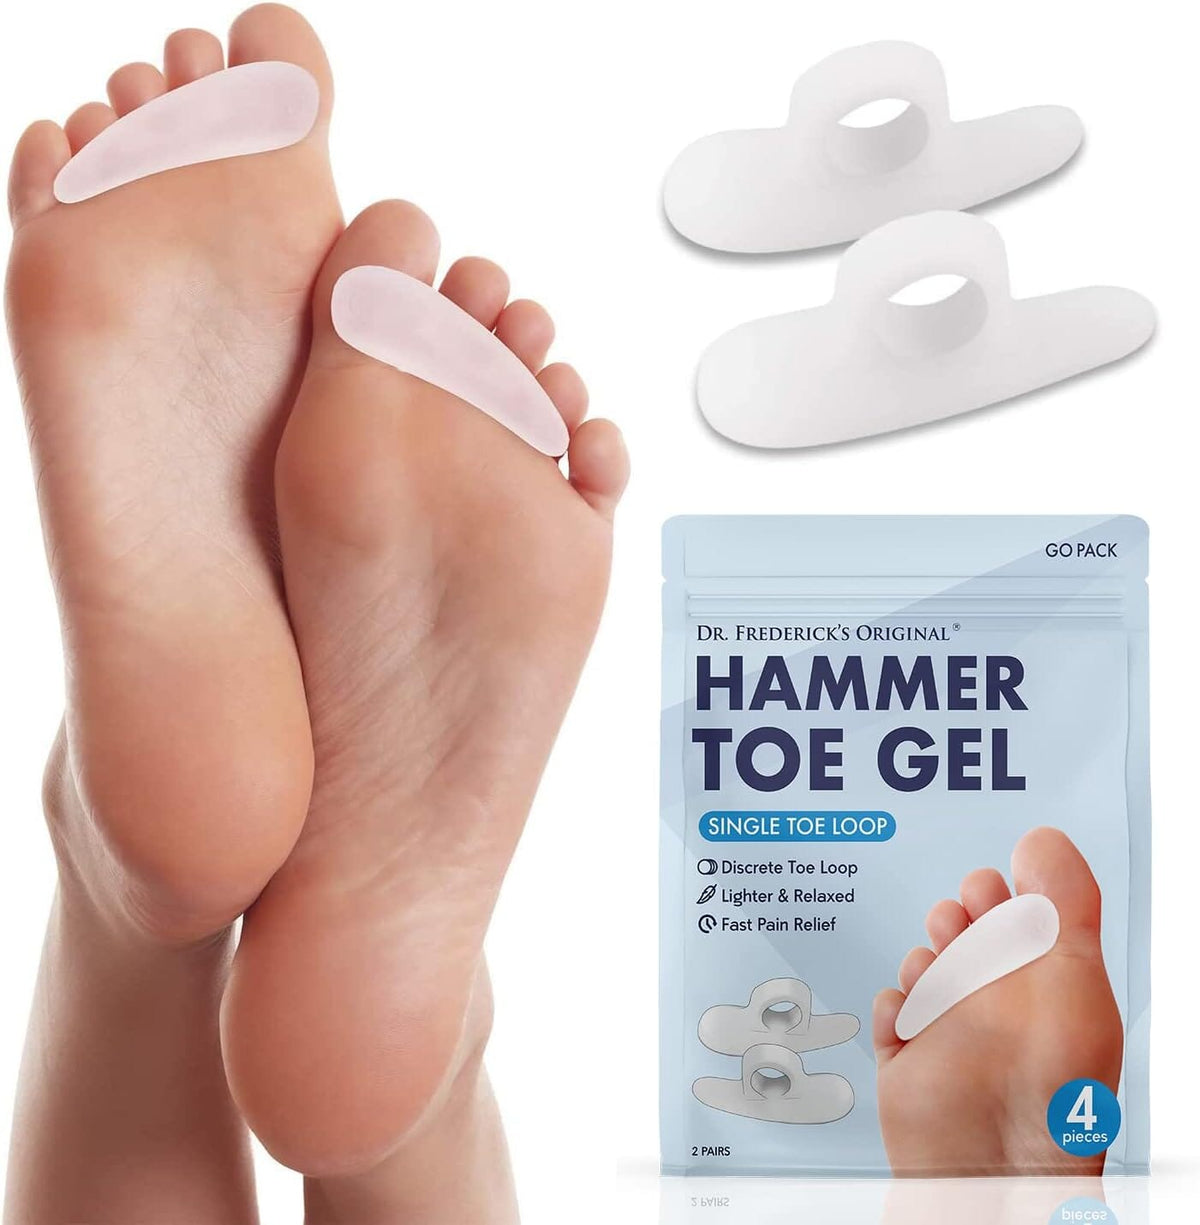 Dr. Frederick&#39;s Original Hammer Toe Gels - 4pcs - Support Crest for Women &amp; Men - Joint Realign - Cushion, Support &amp; Temporary Splint - Crooked, Claw, Diabetic Brace - One Loop Design Foot Pain Dr. Frederick&#39;s Original 